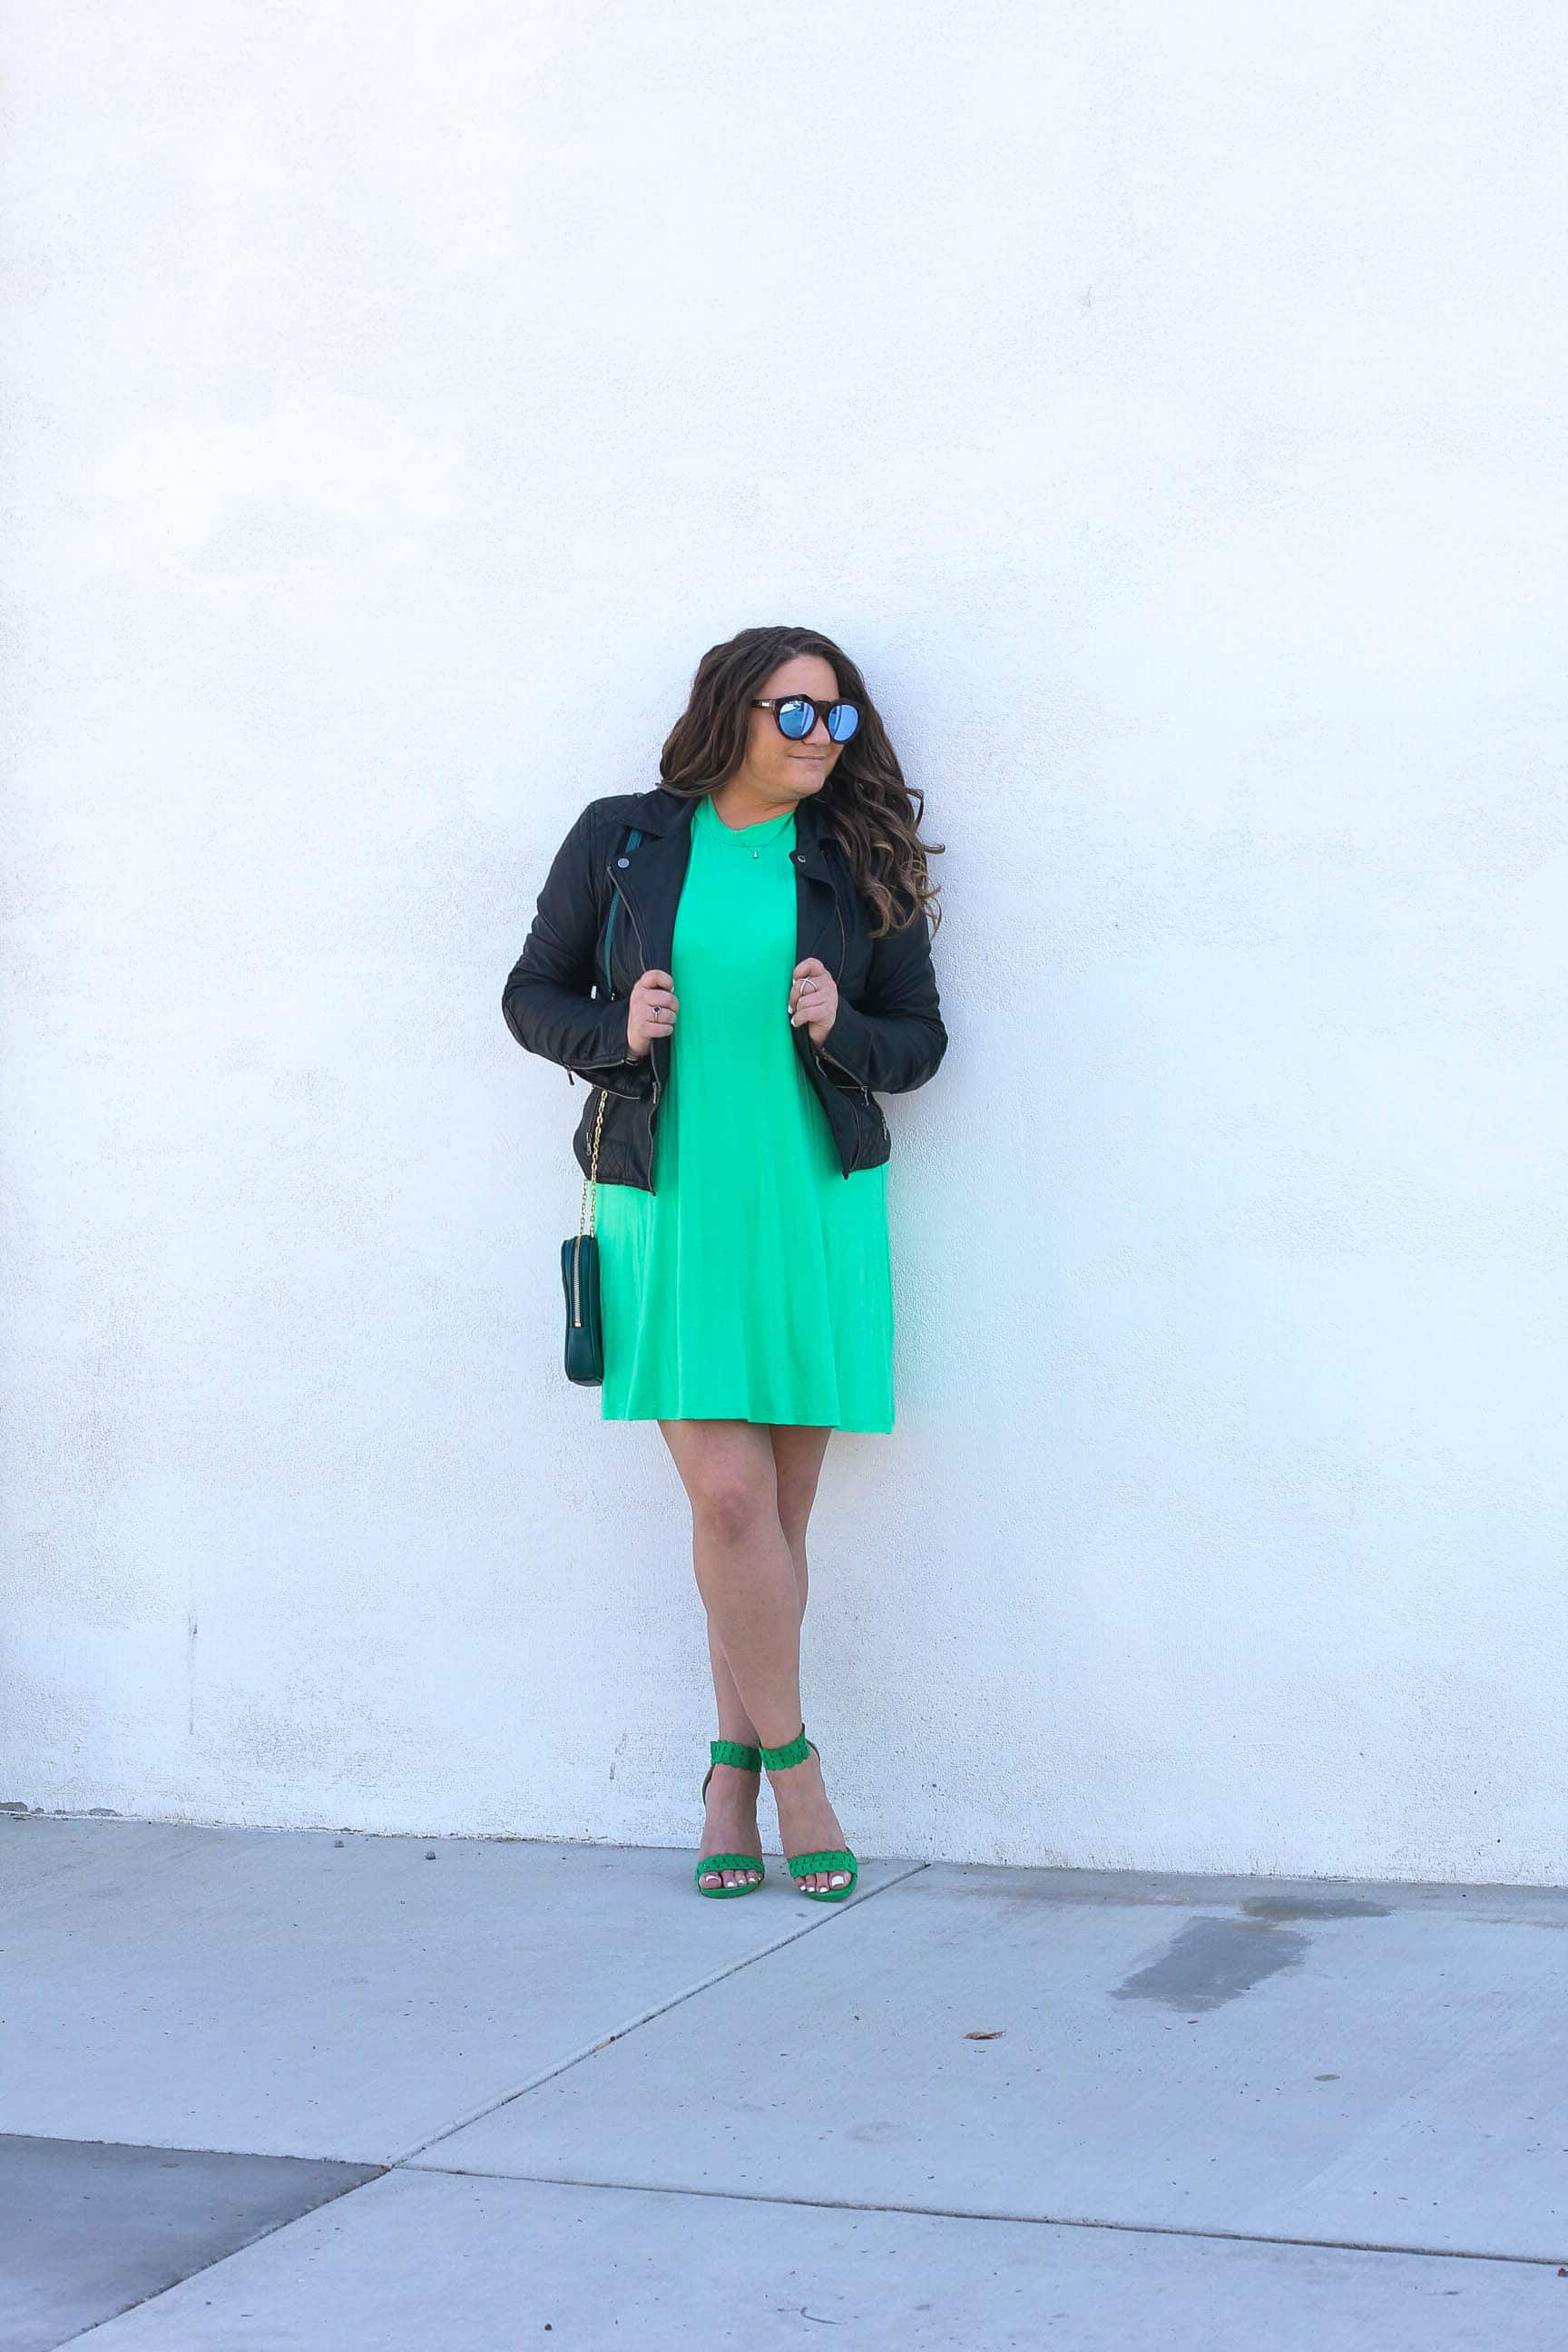 la blogger, style blogger, fashion blogger, missyonmadison, missyonmadison blog, missyonmadison instagram, melissa tierney, st patricks day, st patricks day 2018, green dress, what to wear for st patricks day, green look, bloglovin, green heels, green handbag, green outfit, moto jacket, faux leather moto jacket,